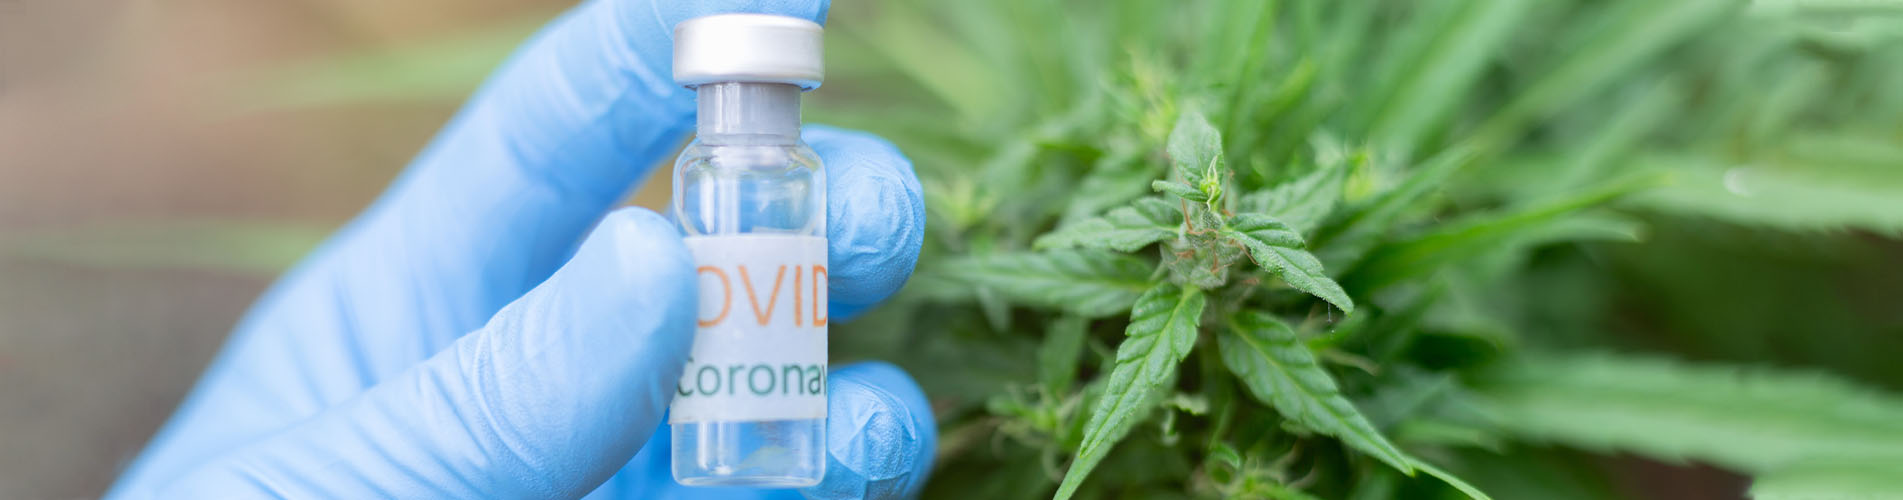 Hemp Compounds Can Block COVID-19 Infection